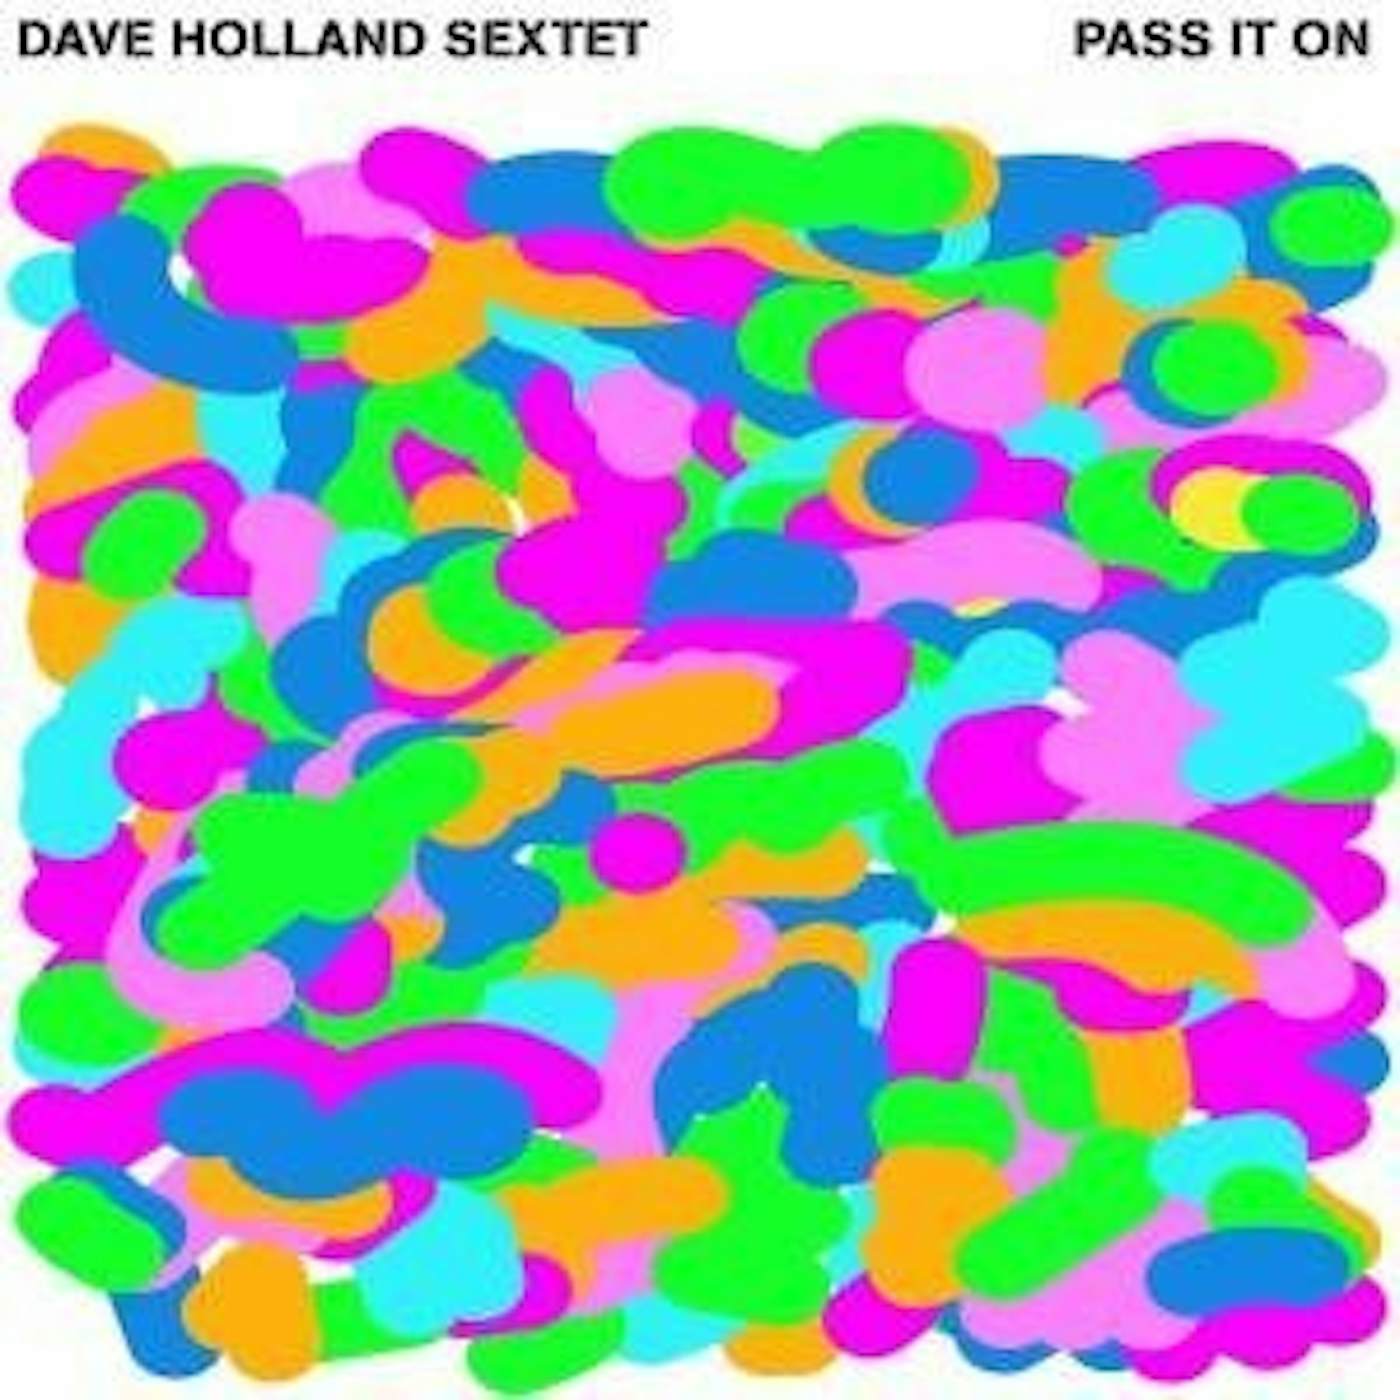 Dave Holland PASS IT ON CD